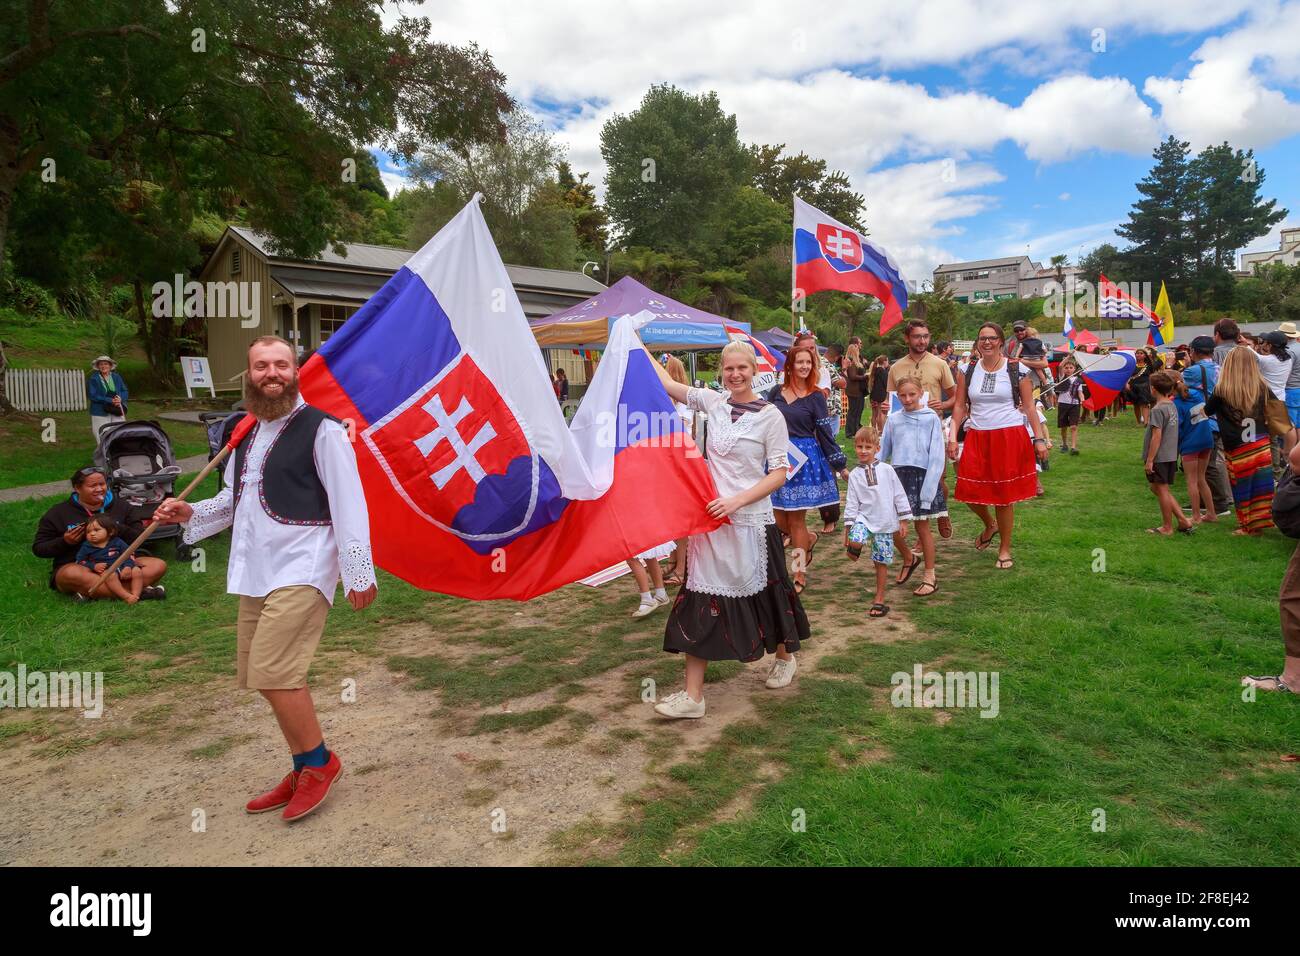 Slovakian people in traditional folk costume and carrying the flag of Slovakia at a multicultural festival. Tauranga, New Zealand Stock Photo